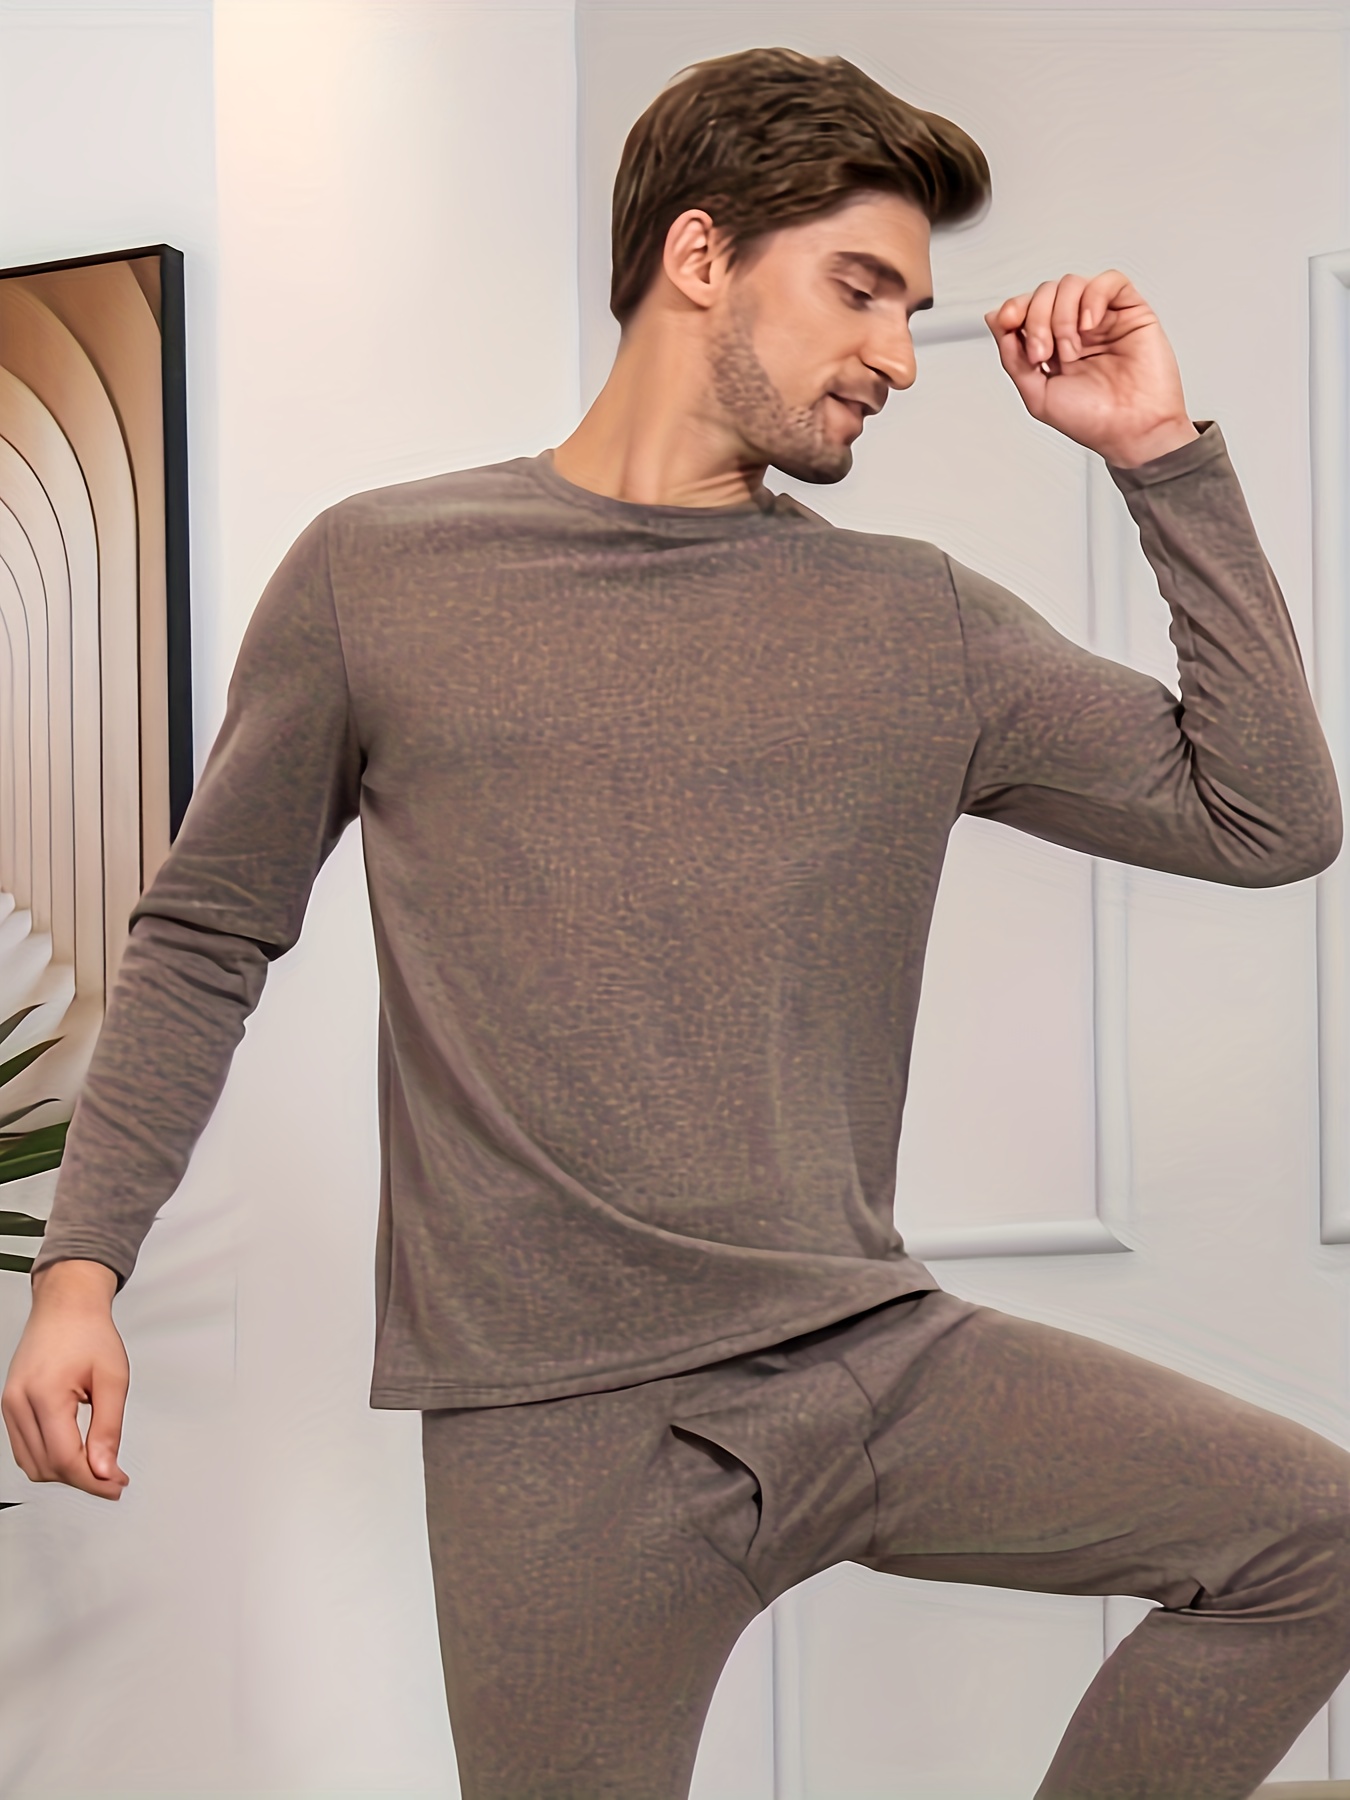 1pc Men's Thickened Fleece Thermal Underwear Tops, Soft And Elastic Bo –  Shift Clothing